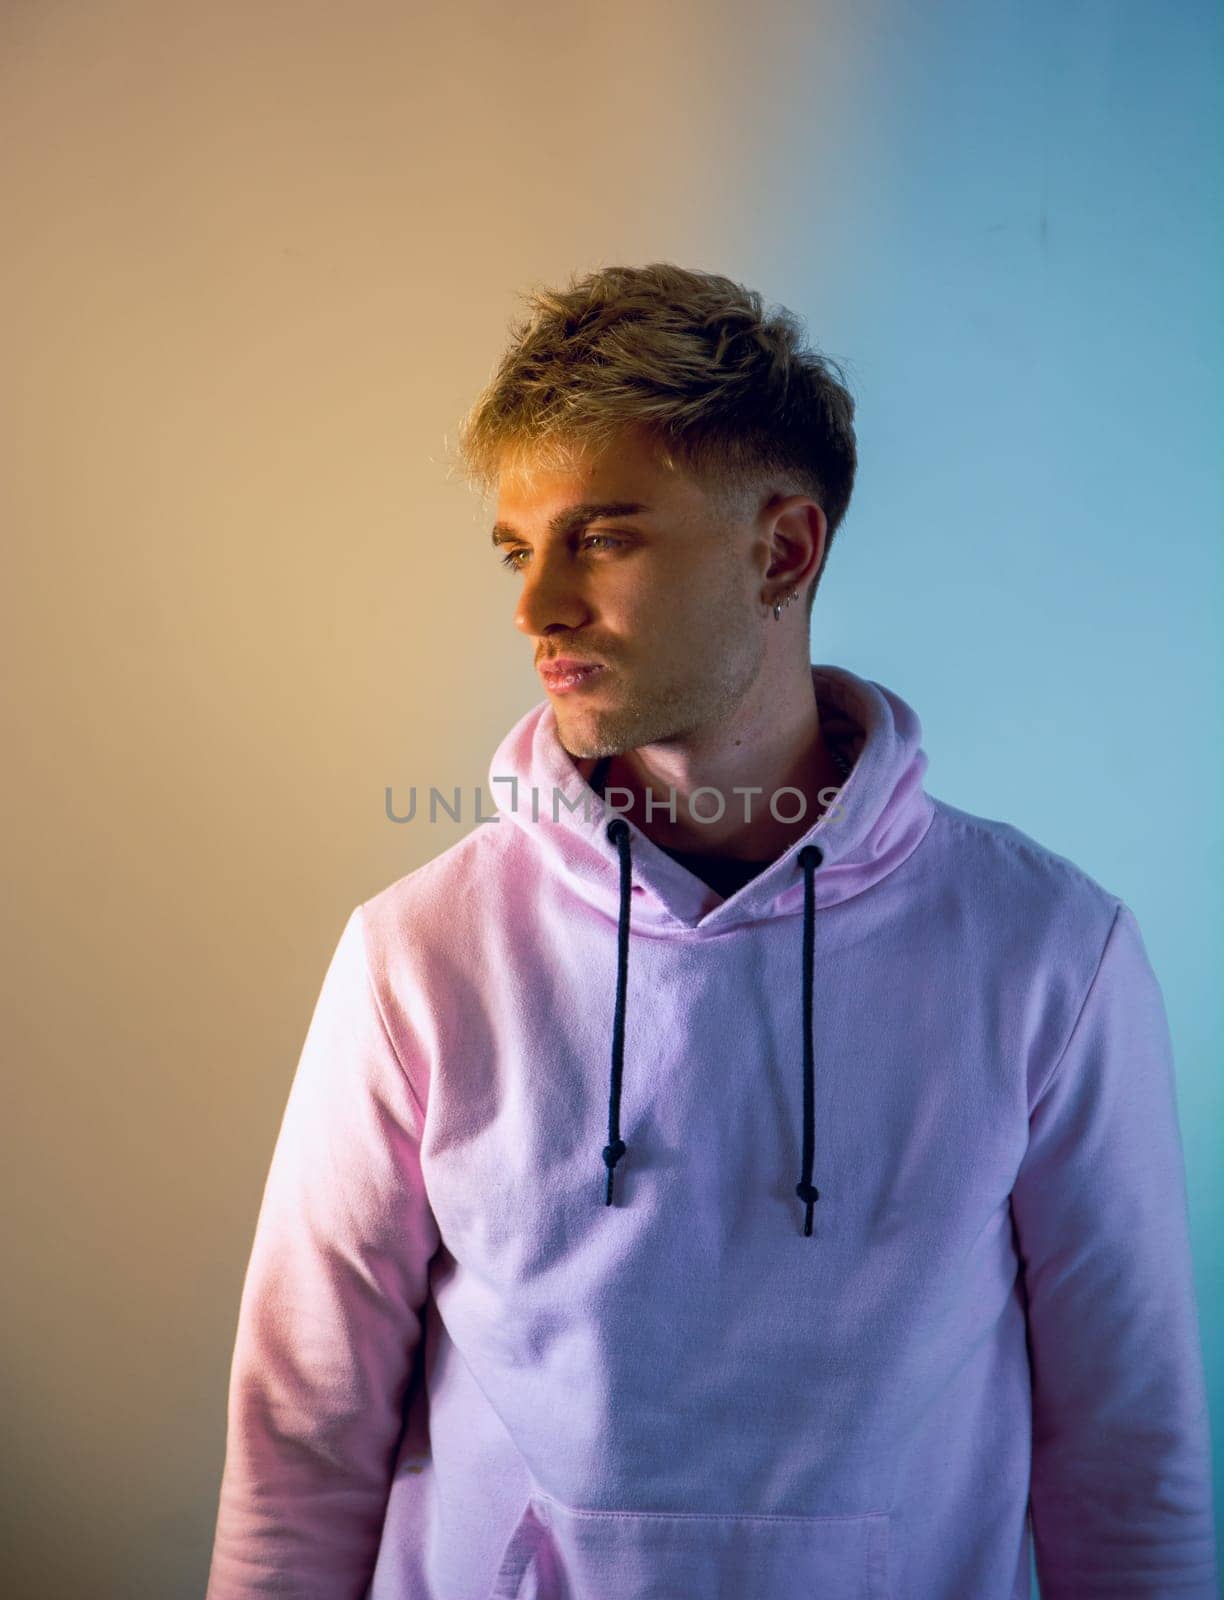 Attractive blond young man in studio shot by artofphoto